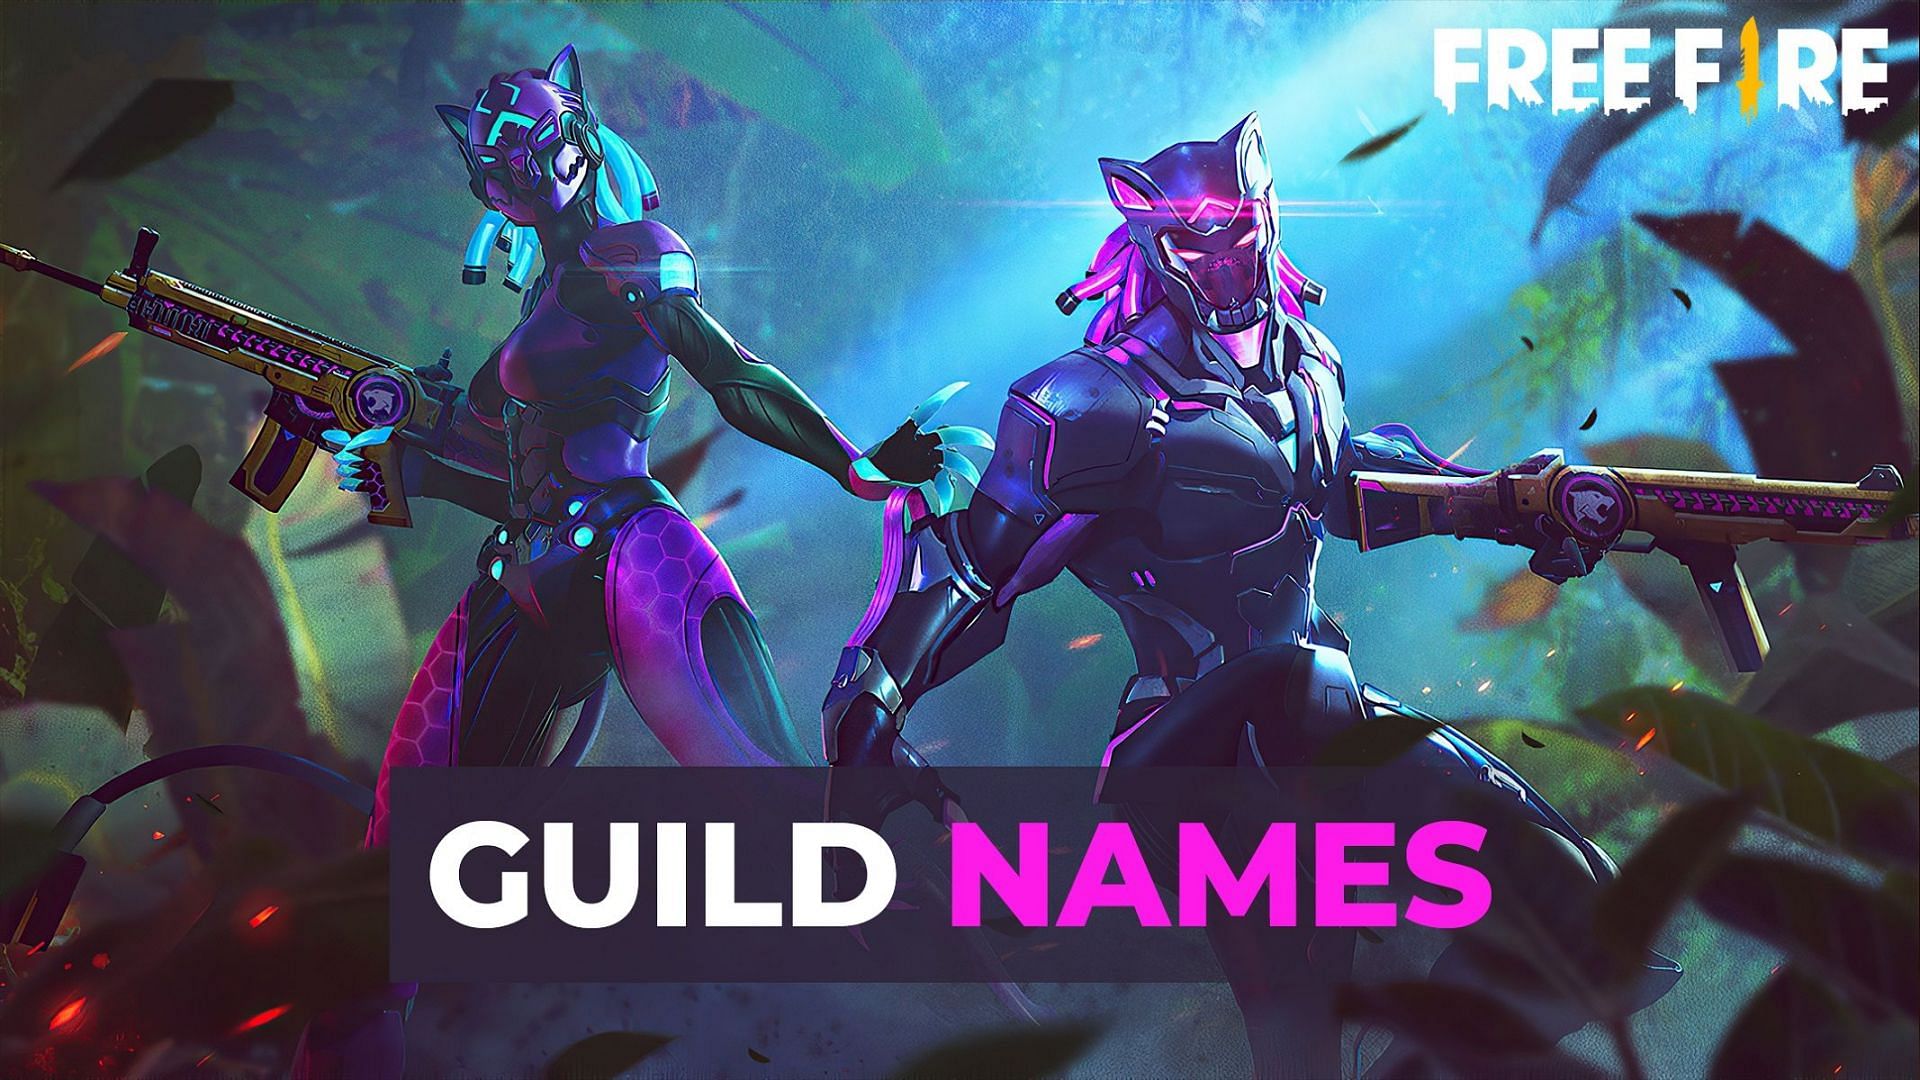 The following is a list of names that players can try out for their guilds (Image via Sportskeeda)